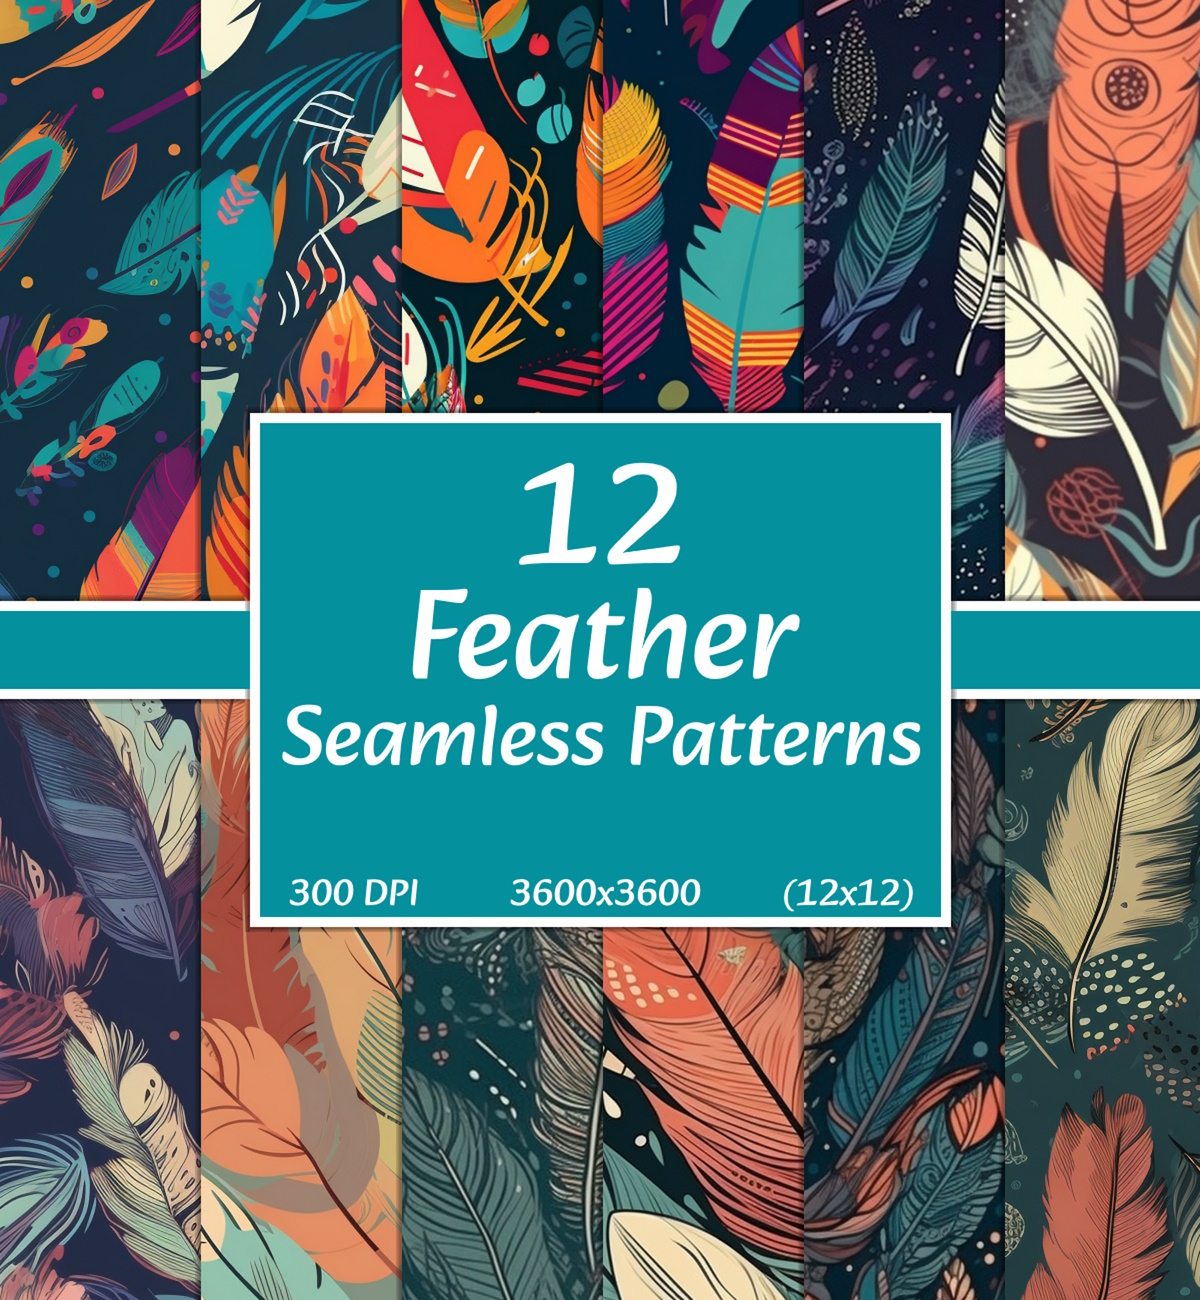 Feather Seamless Patterns